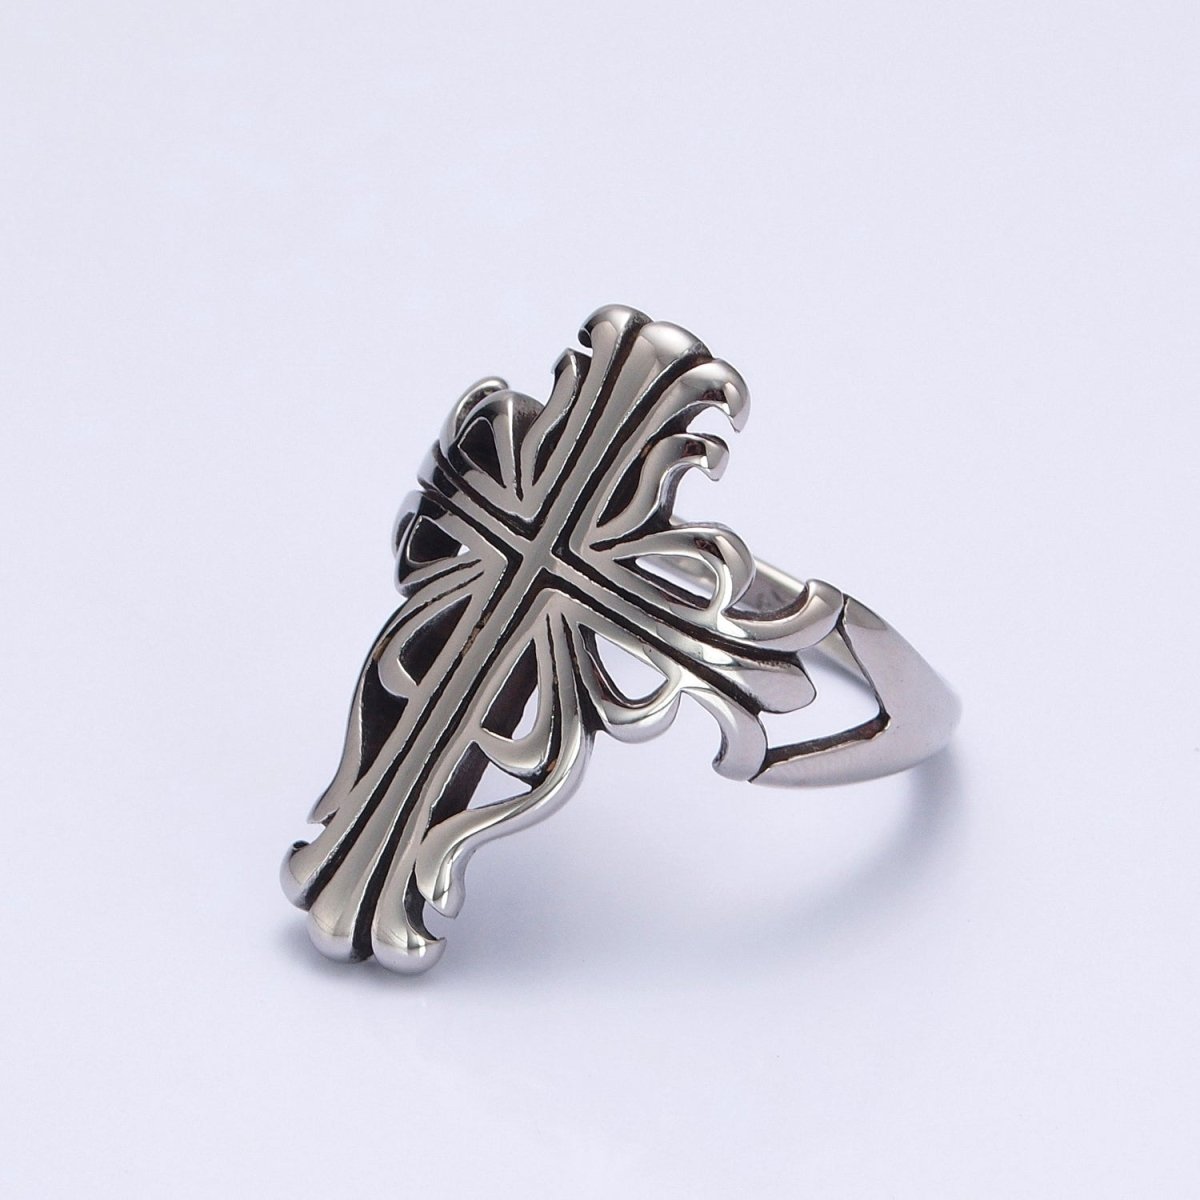 Rustic Cross Ring for Men Stainless Steel Ring Victorian Cross Inspired Chunky Ring O-856 O-857 - DLUXCA